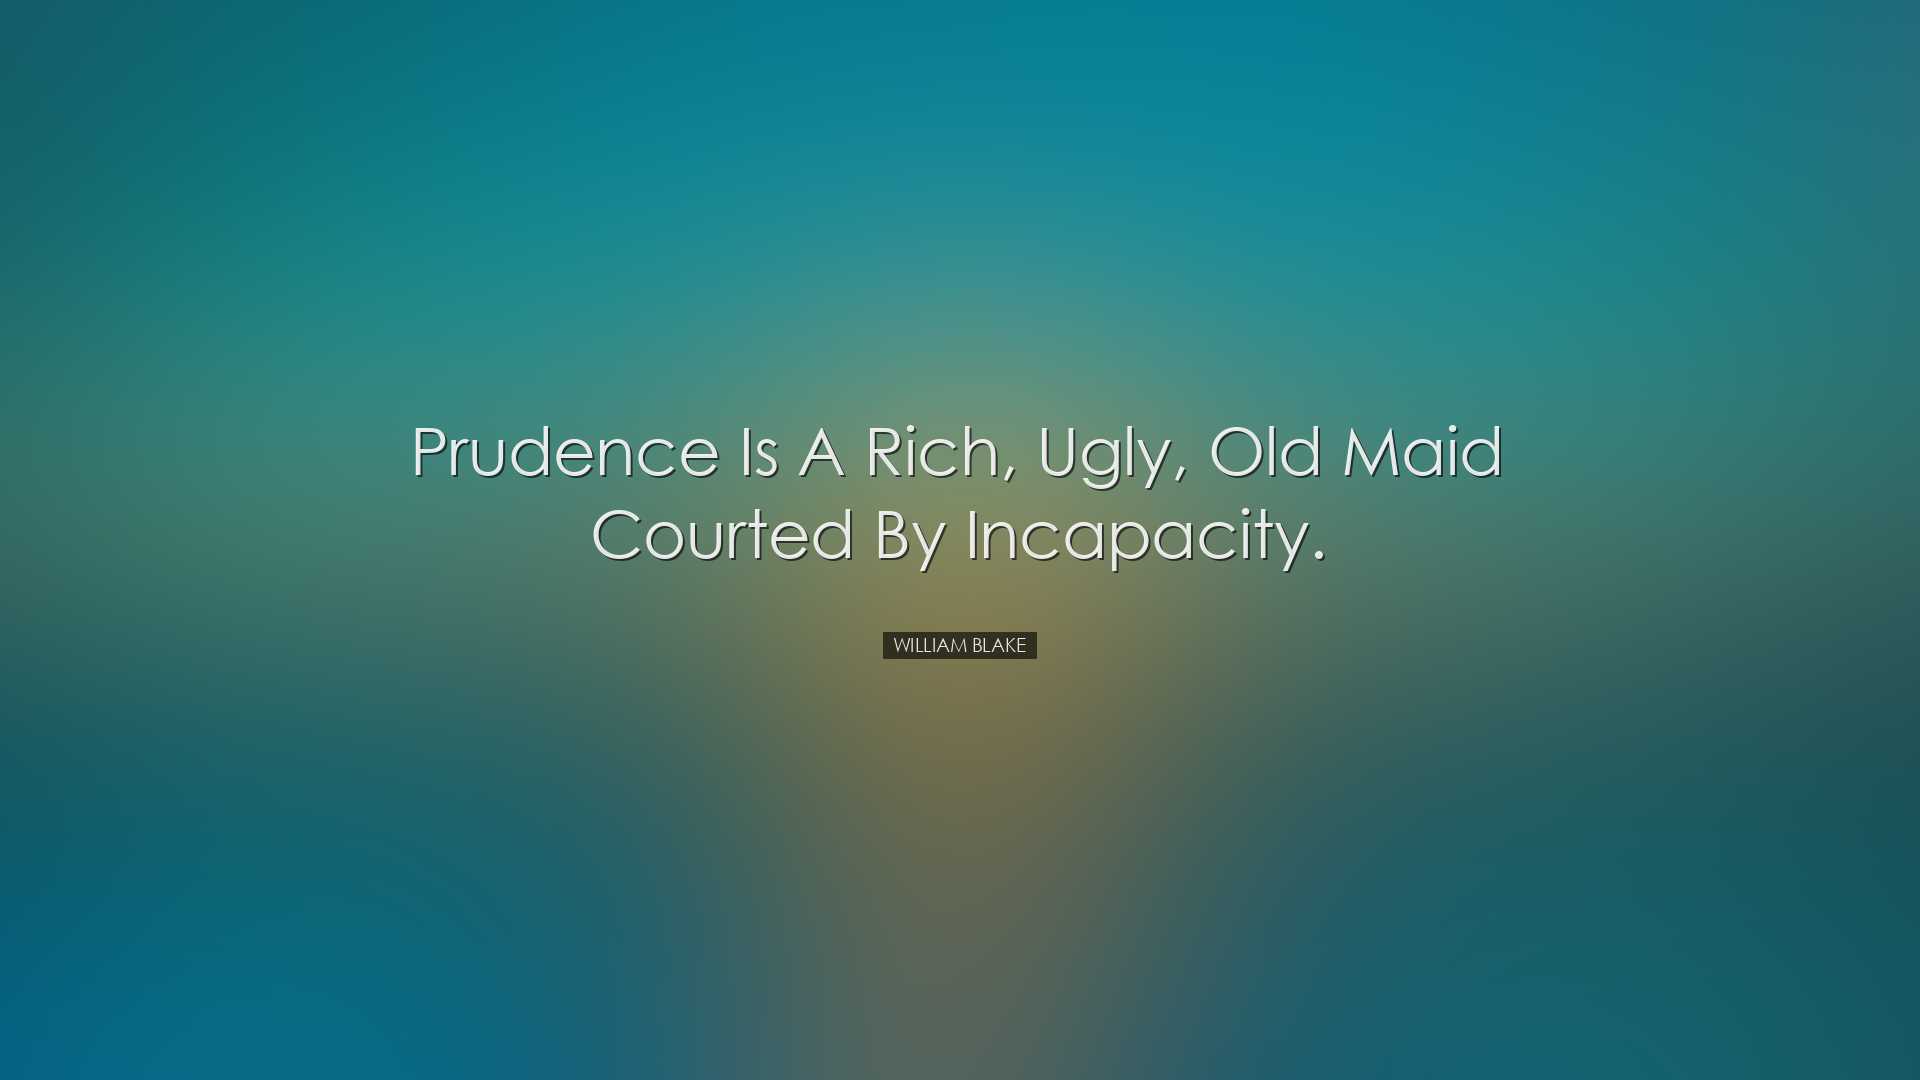 Prudence is a rich, ugly, old maid courted by incapacity. - Willia